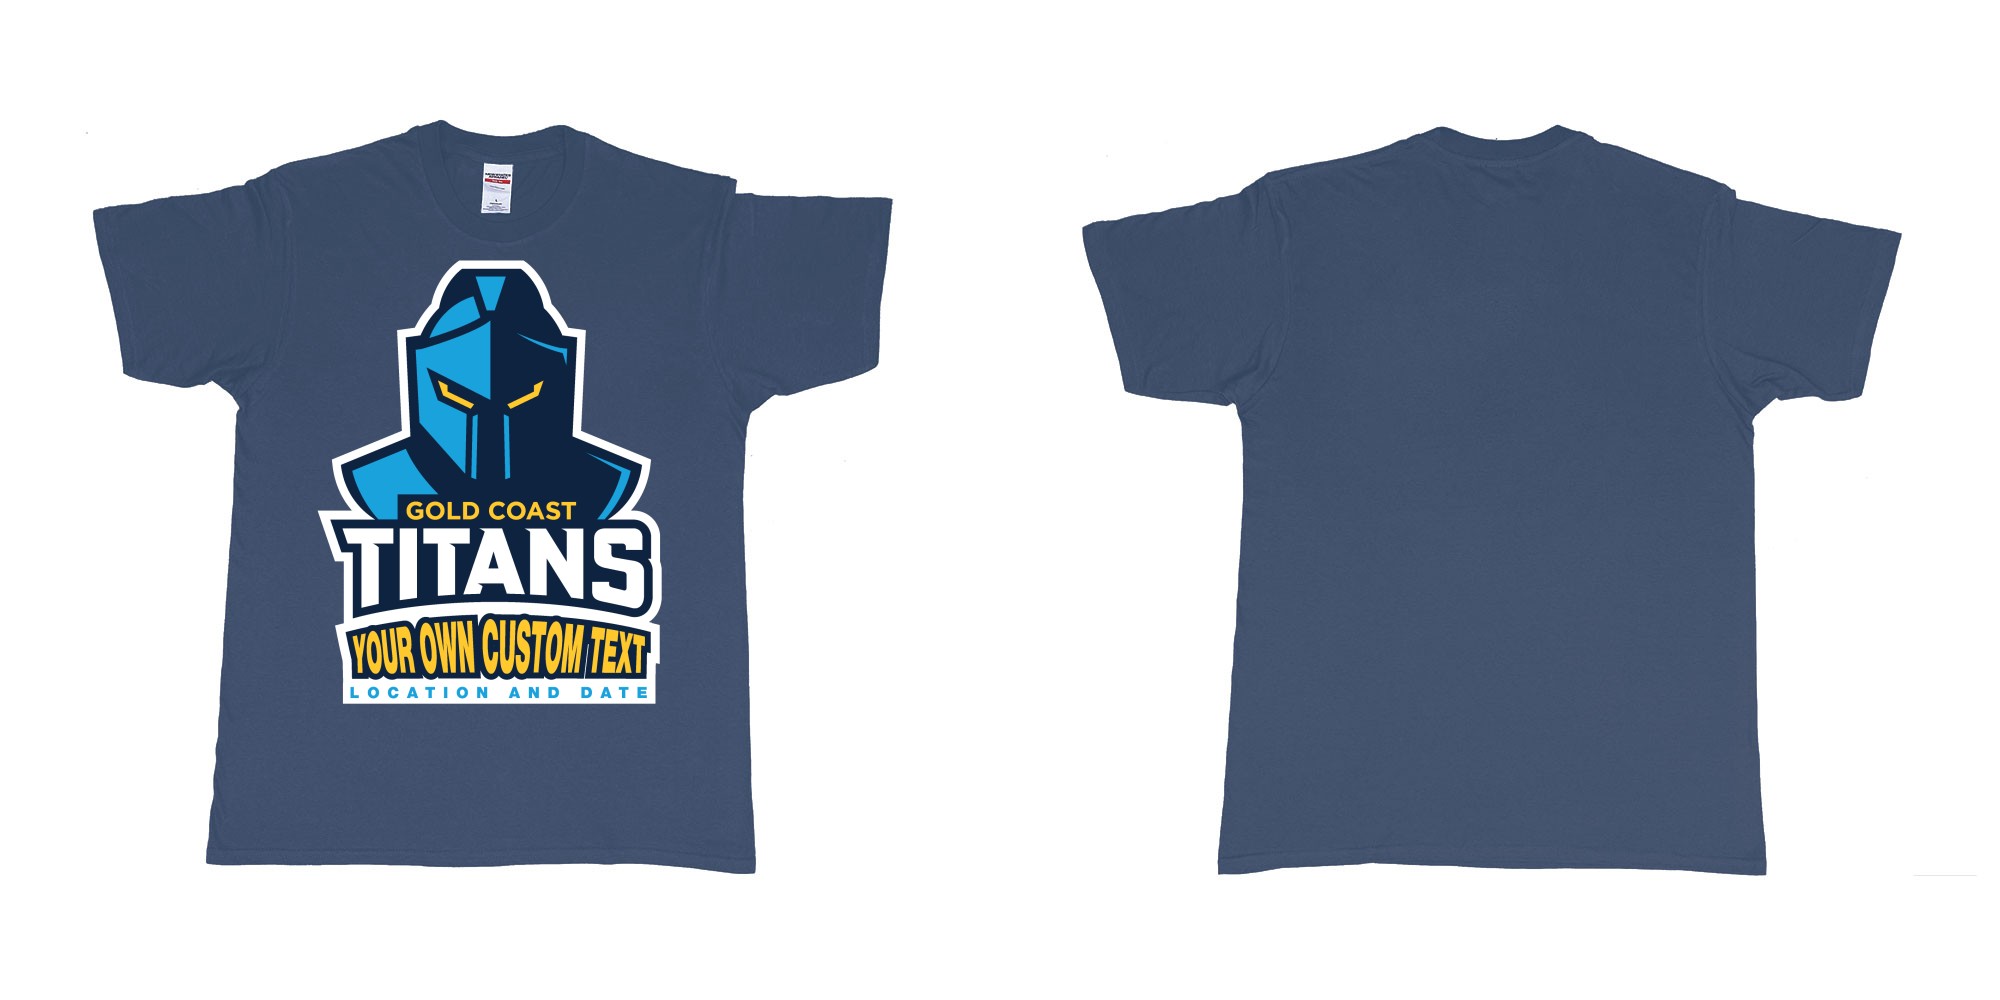 Custom tshirt design gold coast titans own custom design print in fabric color navy choice your own text made in Bali by The Pirate Way